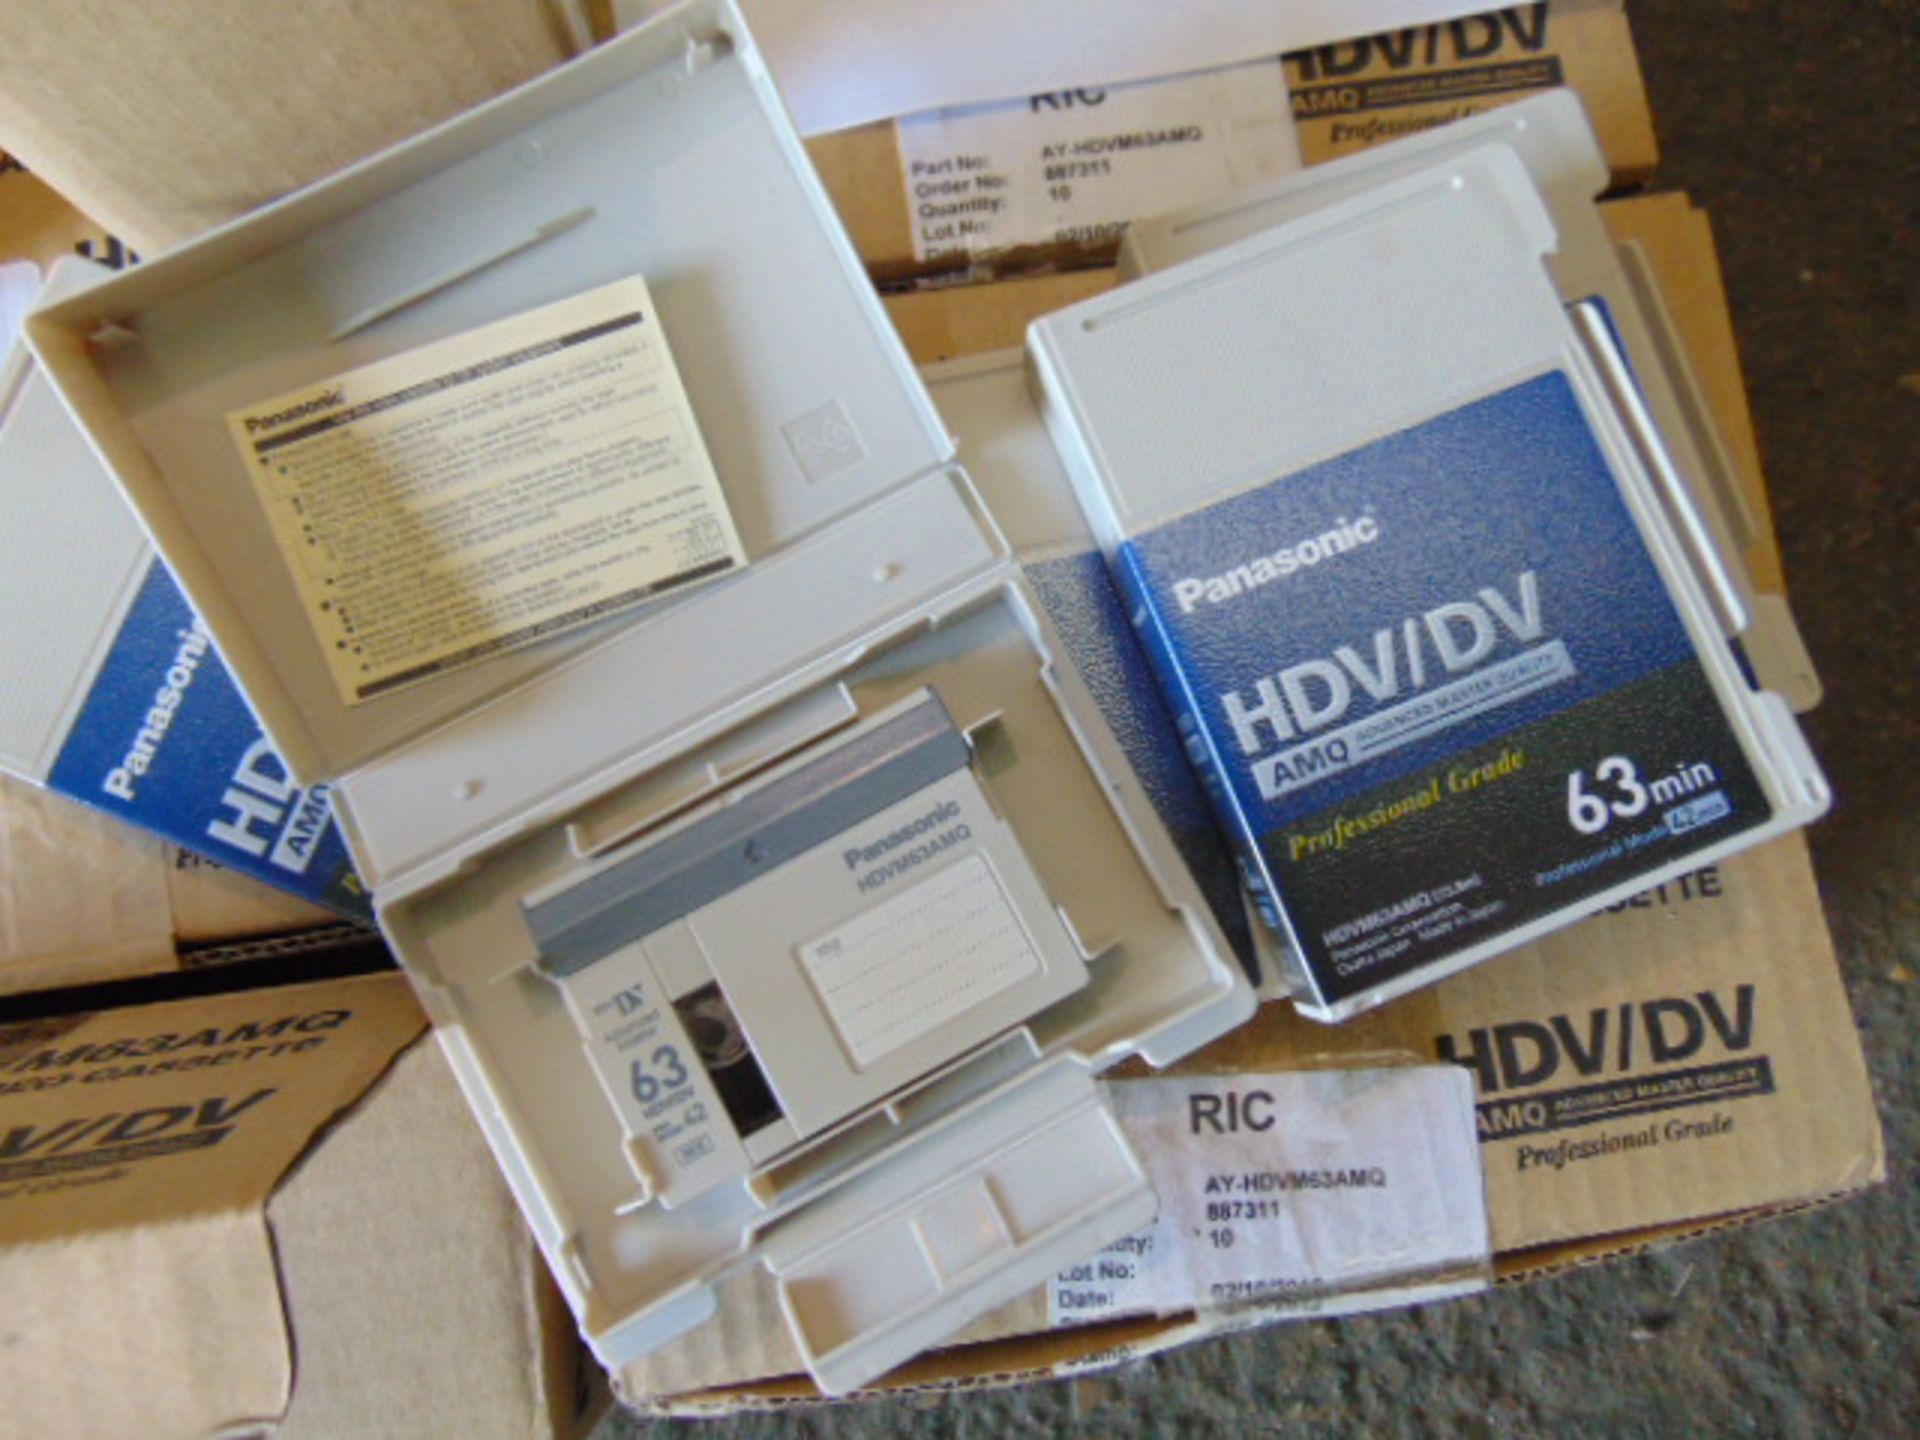 120 x New Unissued Panasonic Digital Video Cassettes as Shown - Image 2 of 3